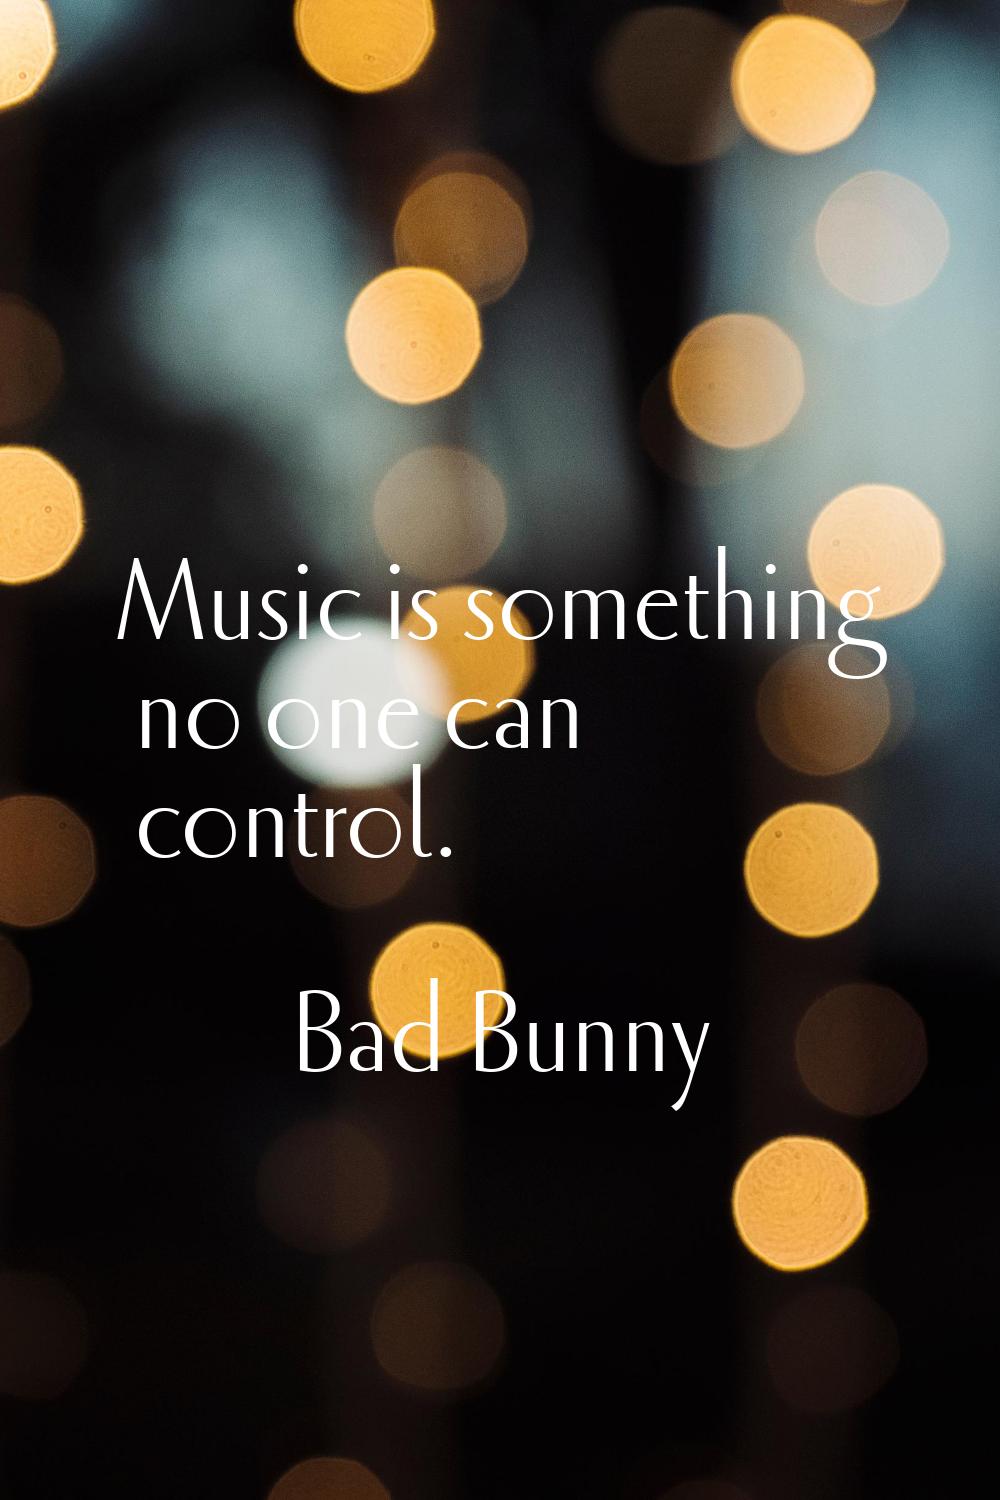 Music is something no one can control.